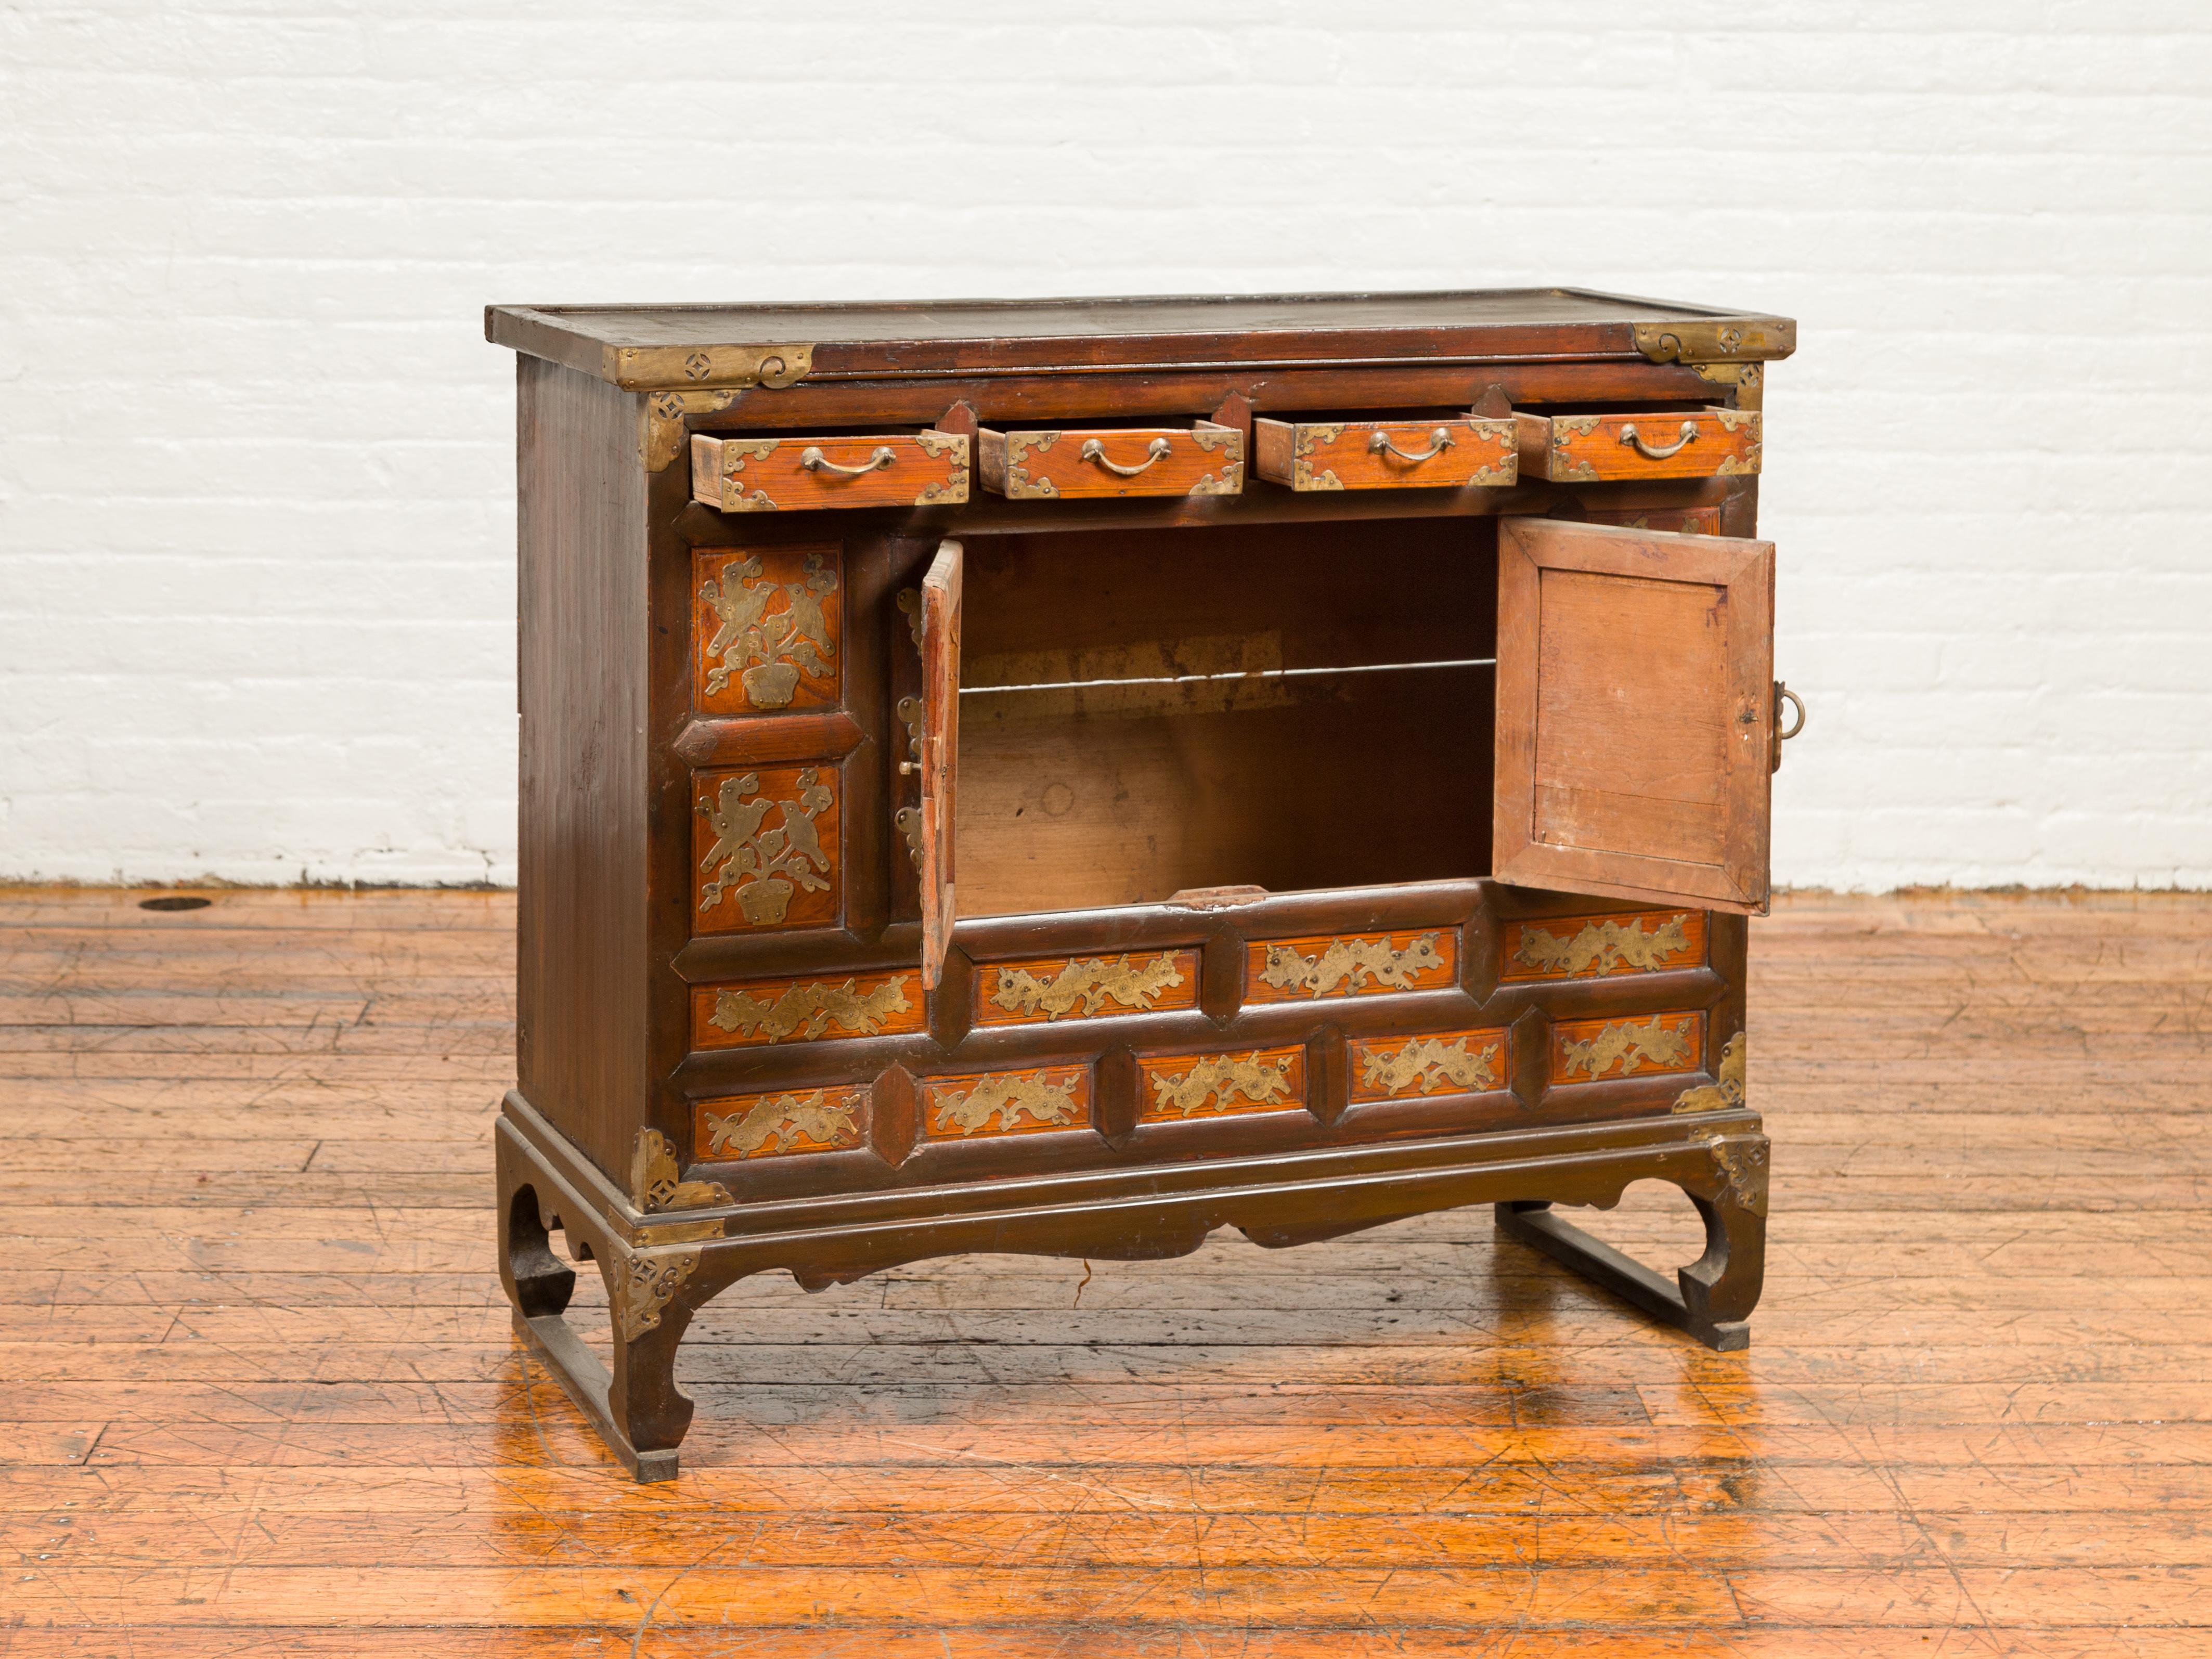 Brass 19th Century Korean Wooden Side Chest with Drawers and Butterfly Hardware